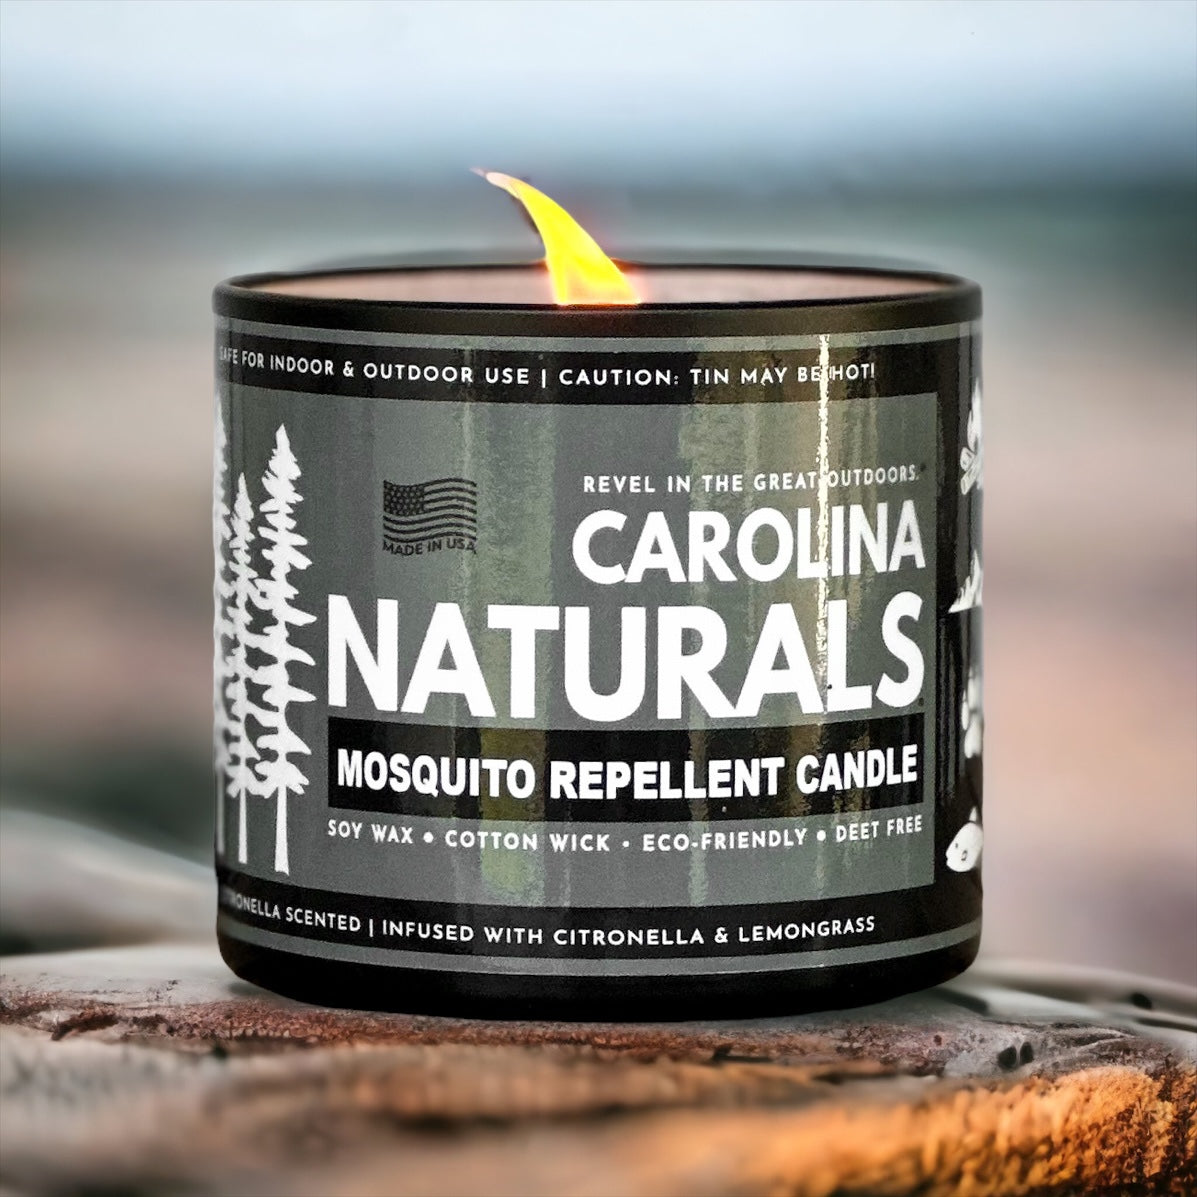 Mosquito Repellent Candle, DEET-Free